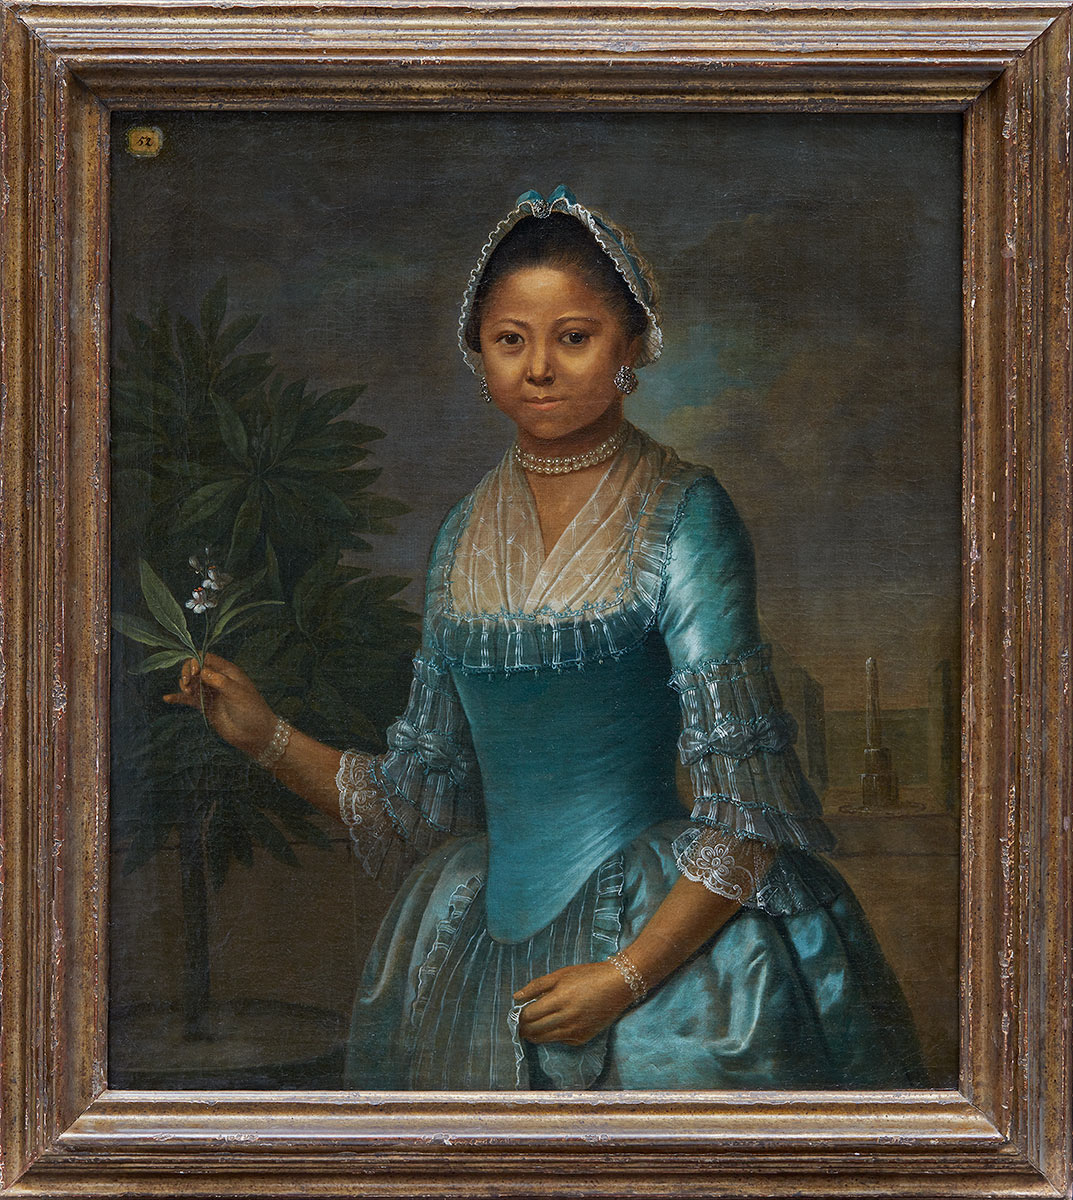 Unknown, European. Portrait of a Lady Holding an Orange Blossom, mid-18th century. Oil on canvas. Overall: 80 × 56.2 cm. Purchase, with funds from the European Curatorial Committee, 2020. 2019/2437